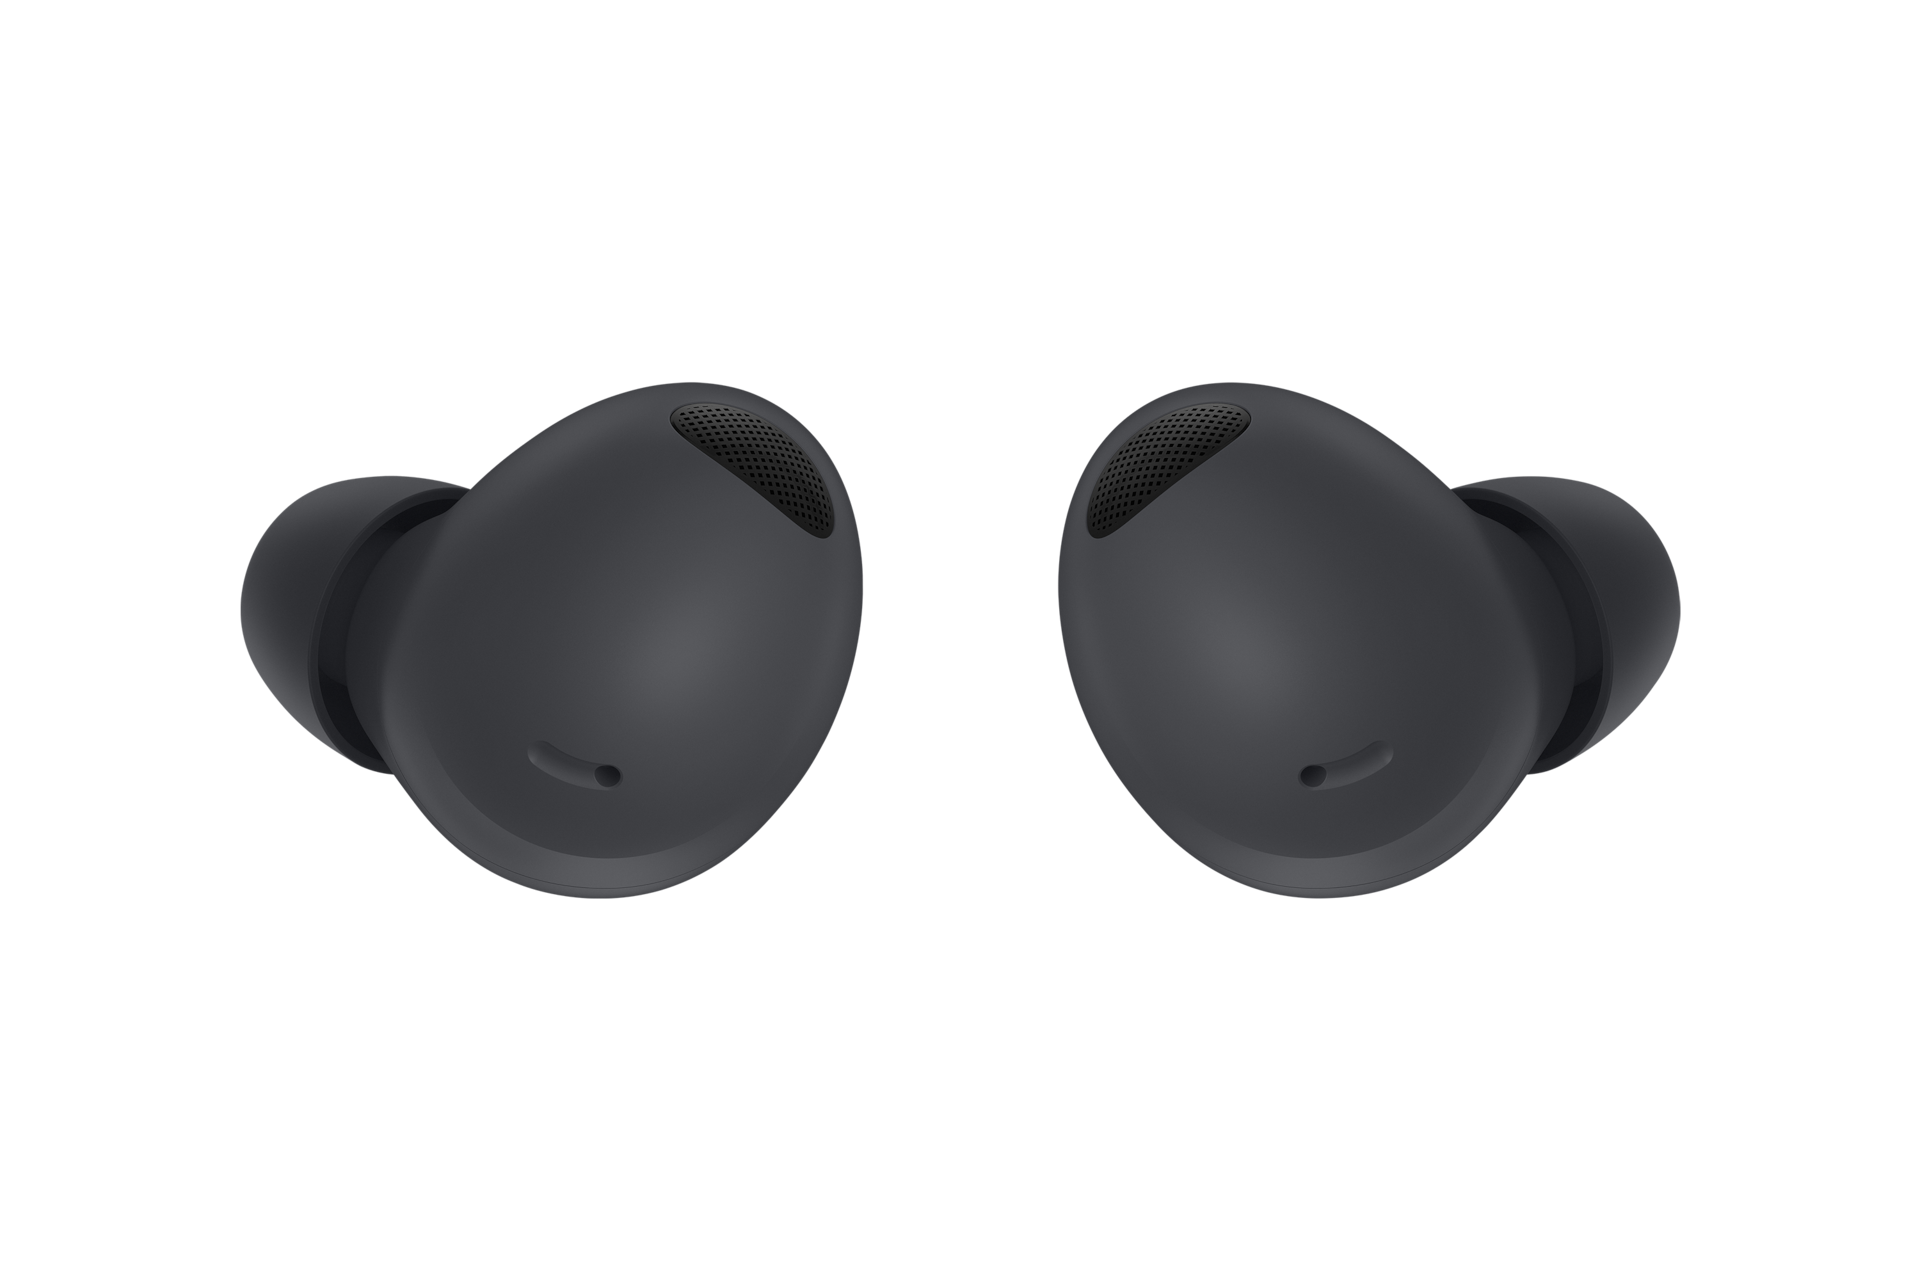 Samsung Galaxy Buds 2 review: Raising the bar for wireless earbuds -  SamMobile